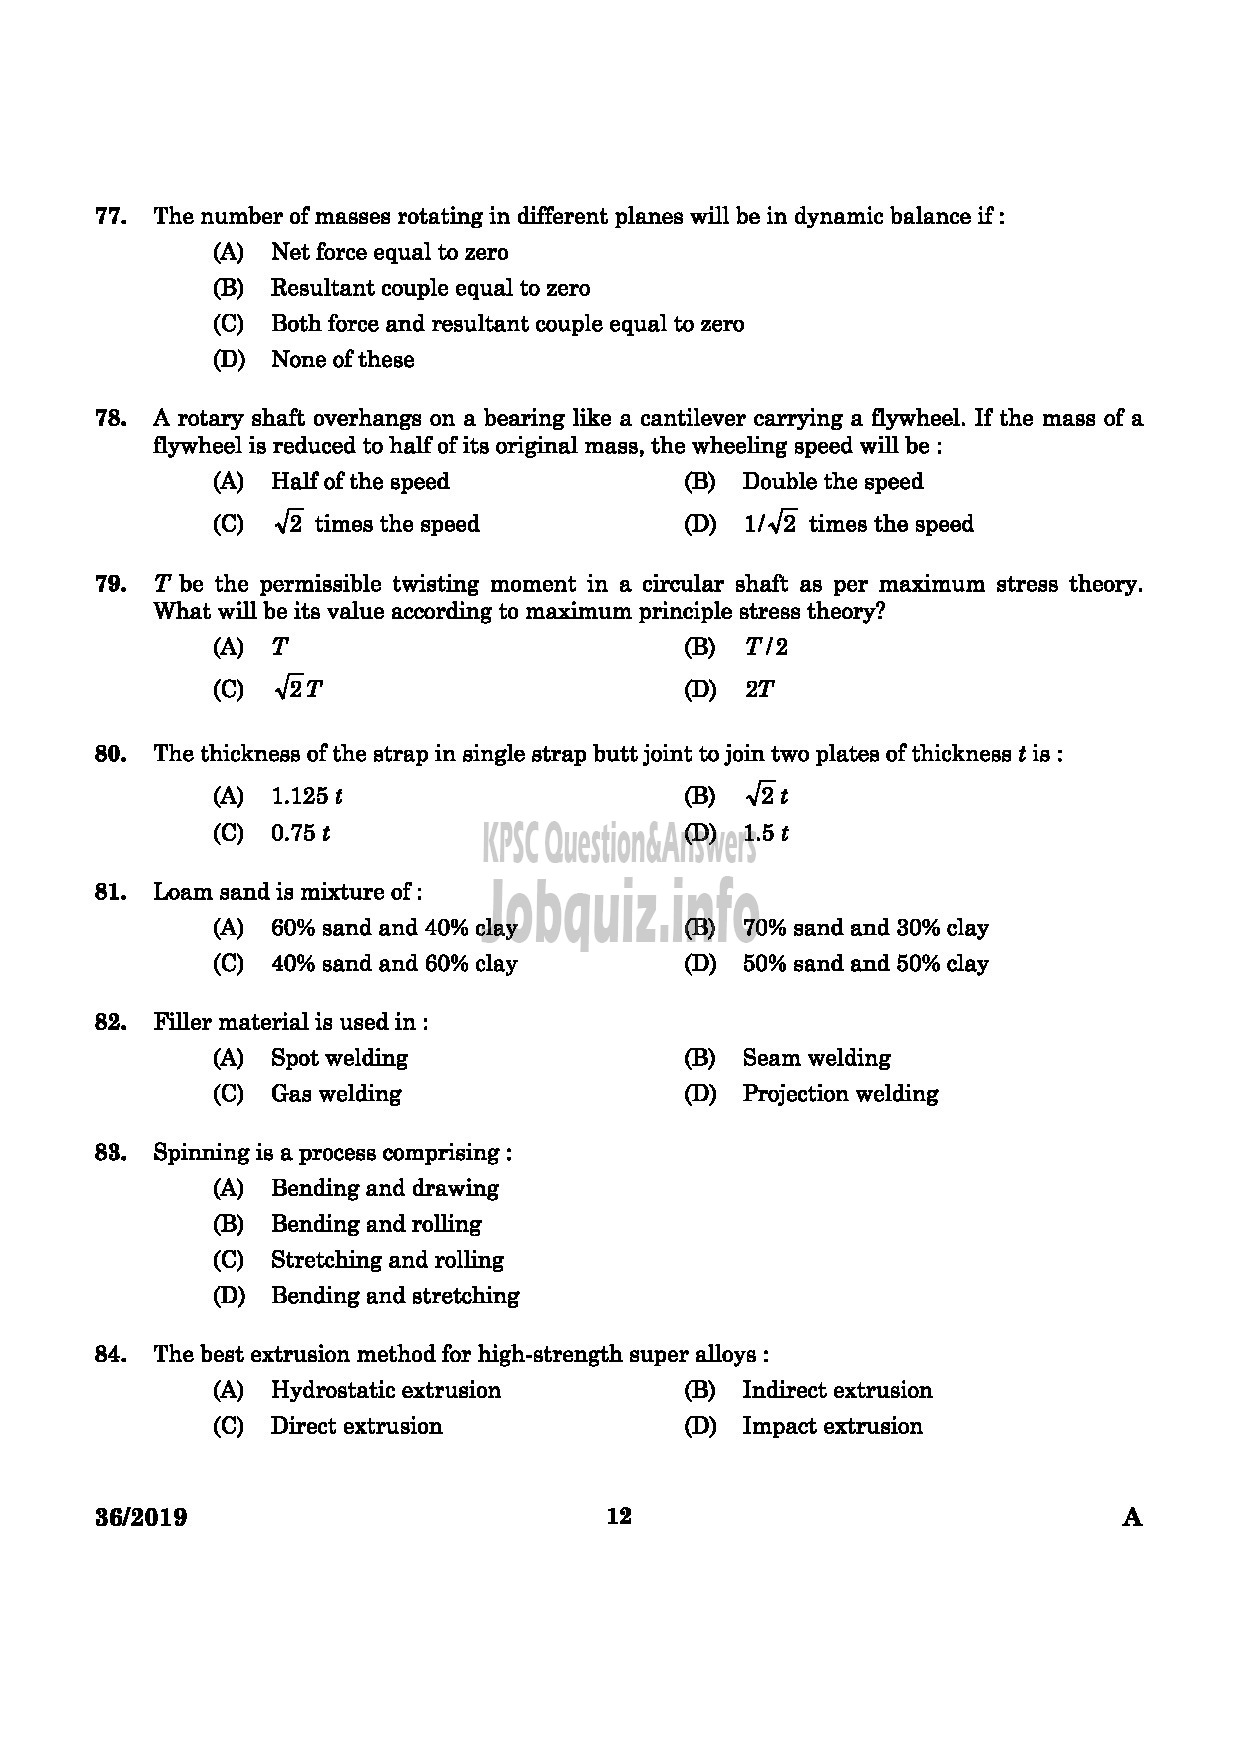 Kerala PSC Question Paper - Assistant Drilling Engineer Mining & Geology Medium of Question : English -10